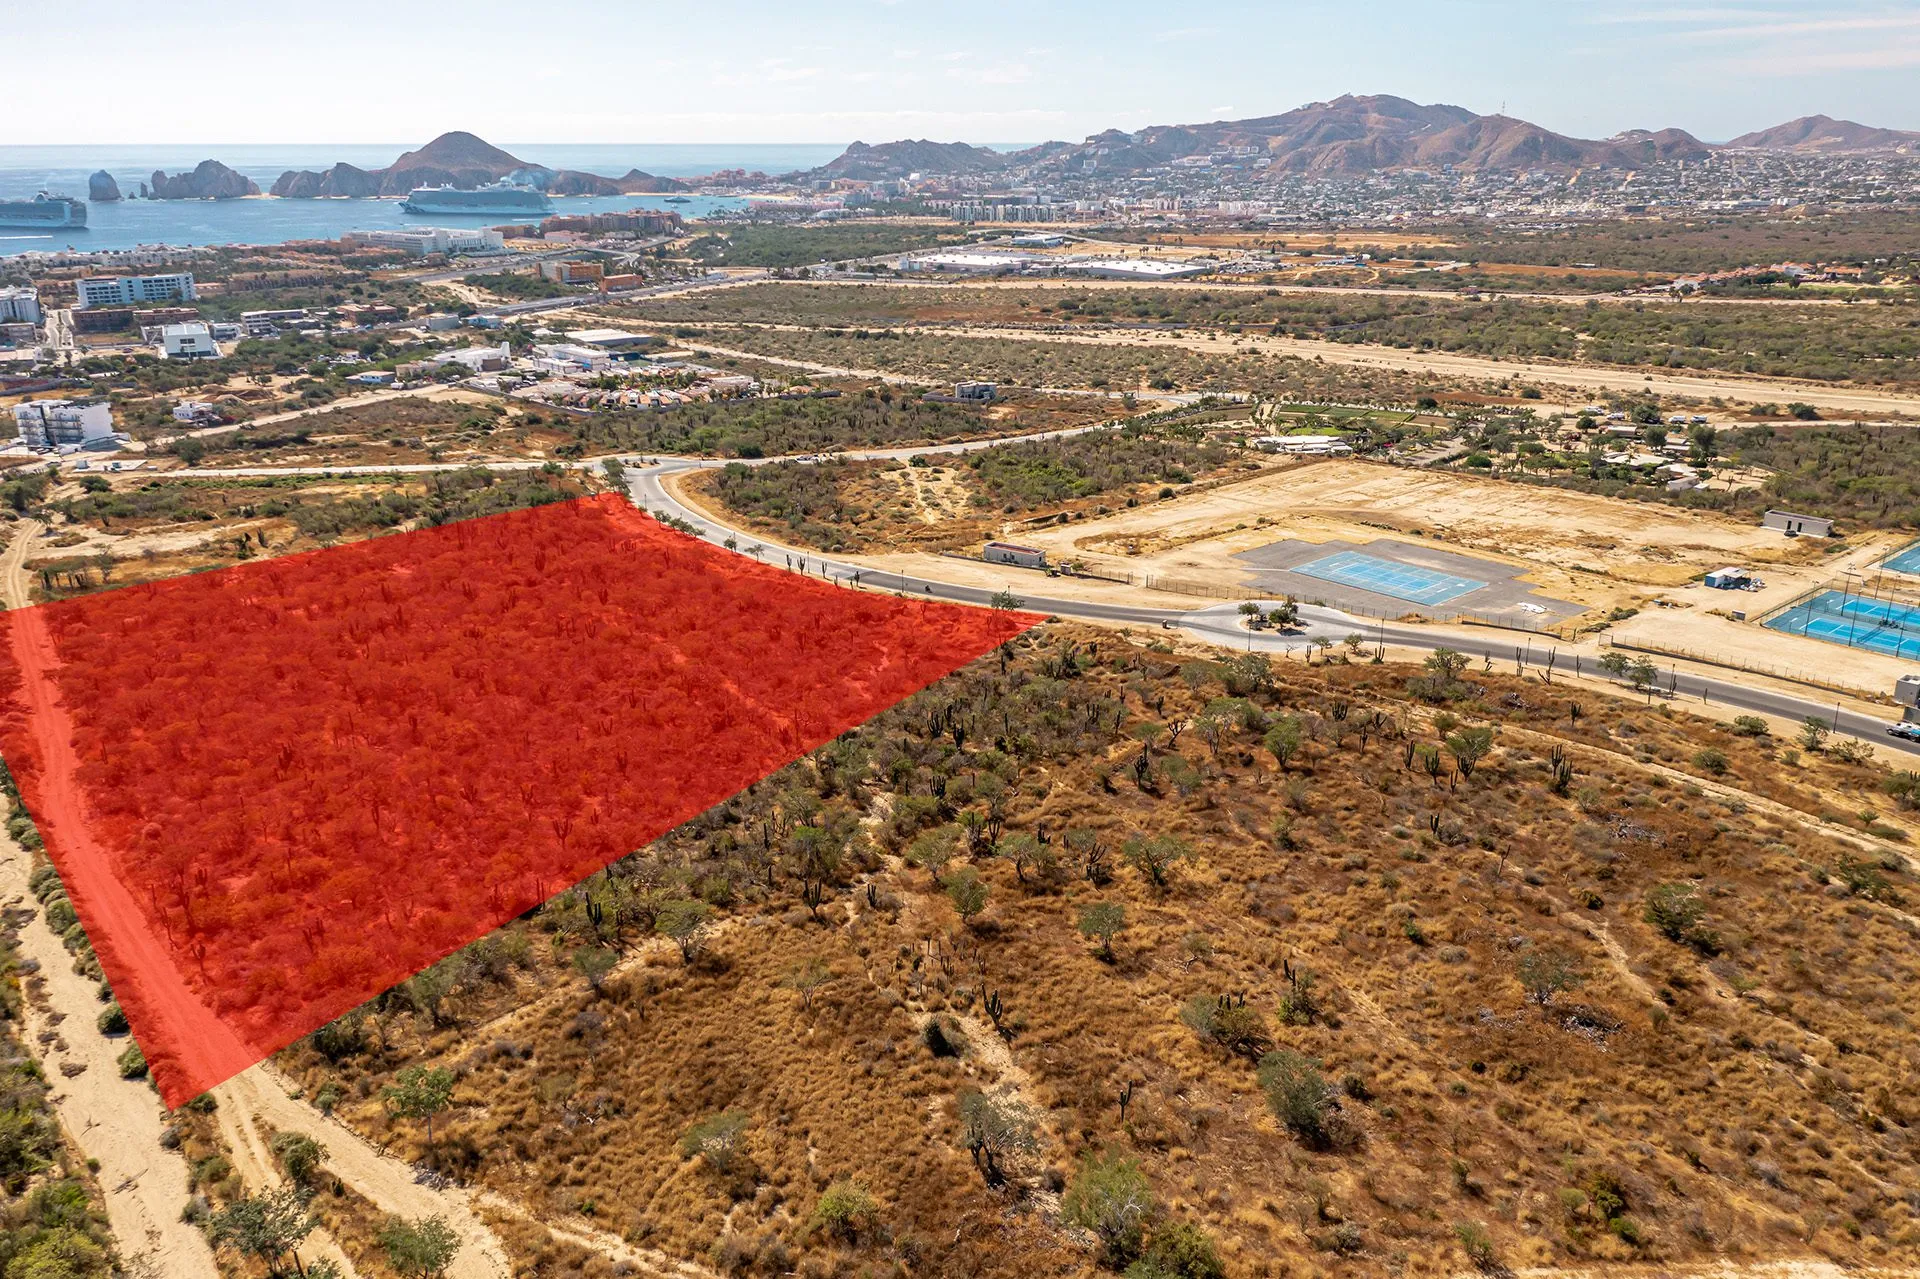 Lot VIII-B, is an excellent option for residential development. This 9.5 acre development parcel is located inside one of the most popular communities in Los Cabos. With a natural downward slope this lot offers incredible views of Cabo's bay.